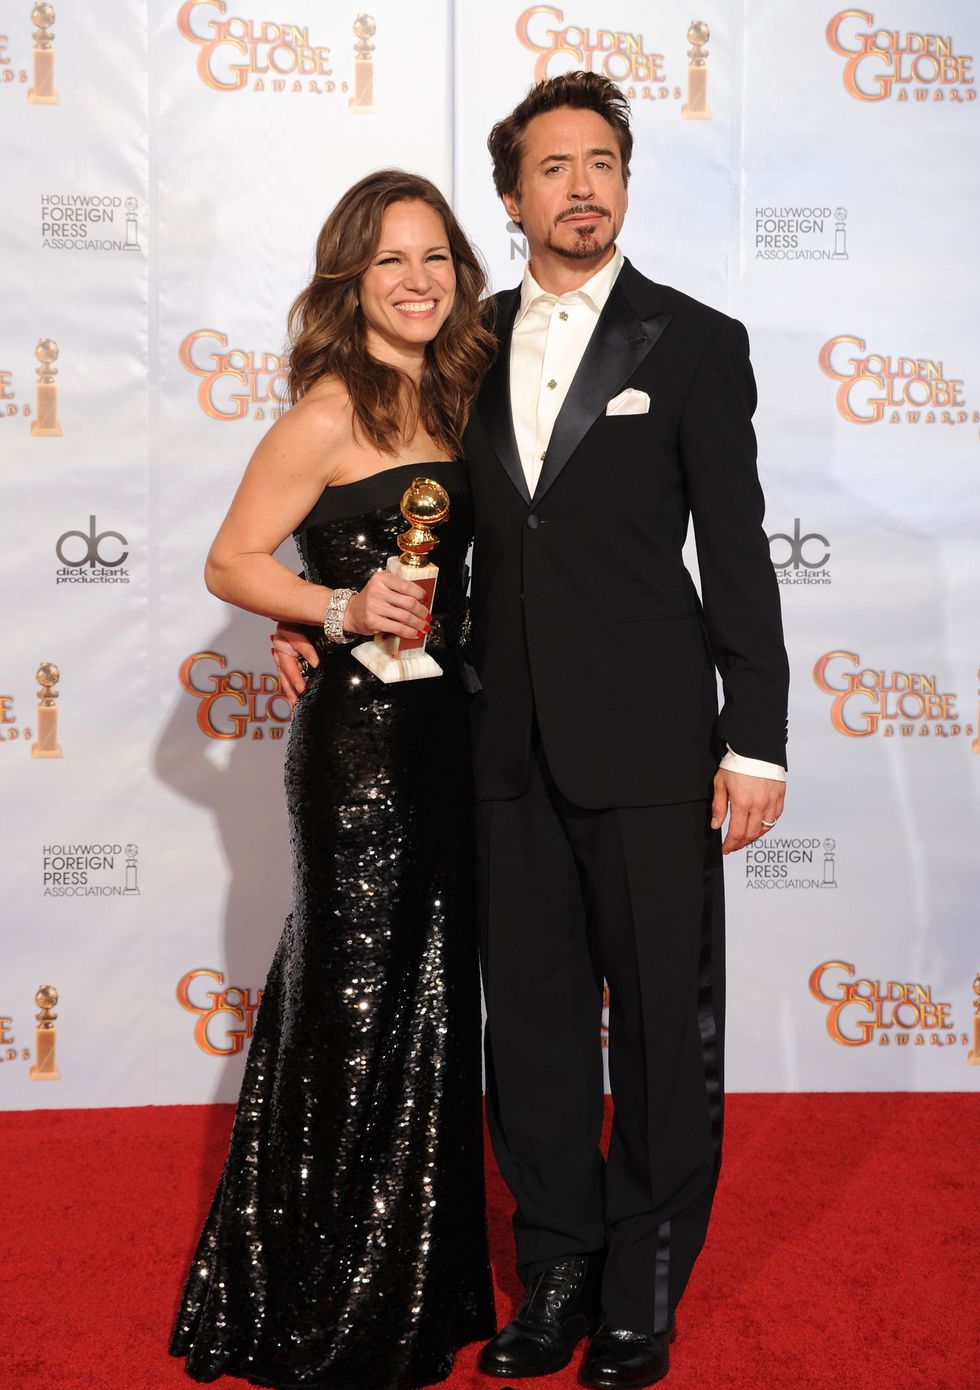 beverly hills, ca january 17 actor robert downey, jr r and his wife susan with the best performance by an actor in a motion picture comedy or musical award for sherlock holmes in the press room at the 67th annual golden globe awards held at the beverly hilton hotel on january 17, 2010 in beverly hills, california photo by kevin wintergetty images